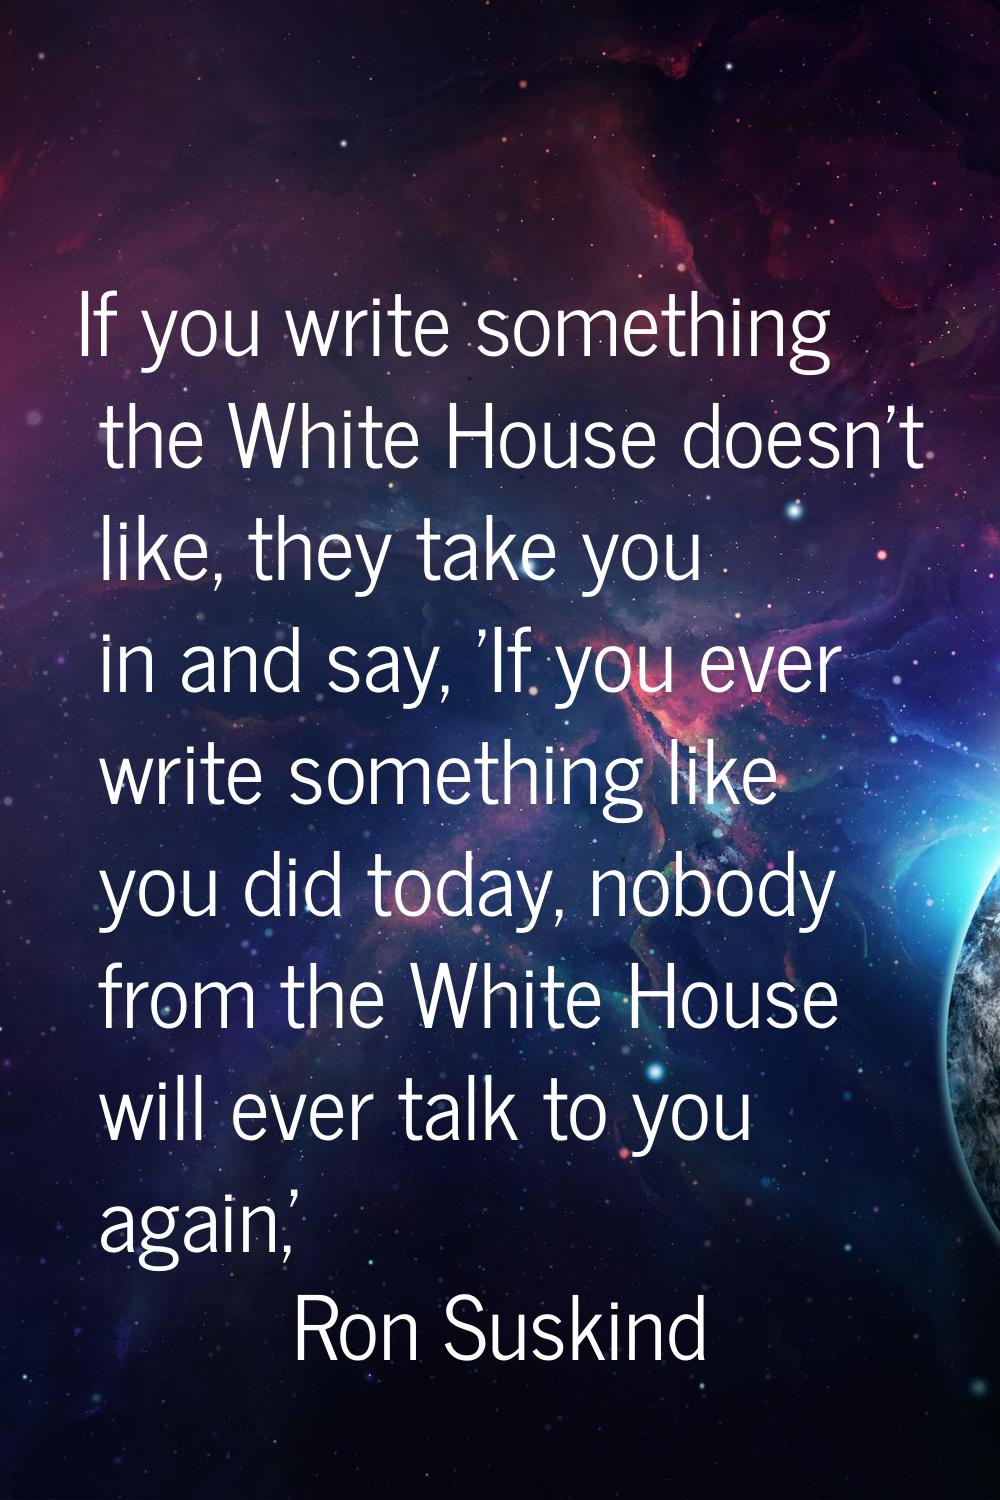 If you write something the White House doesn't like, they take you in and say, 'If you ever write s